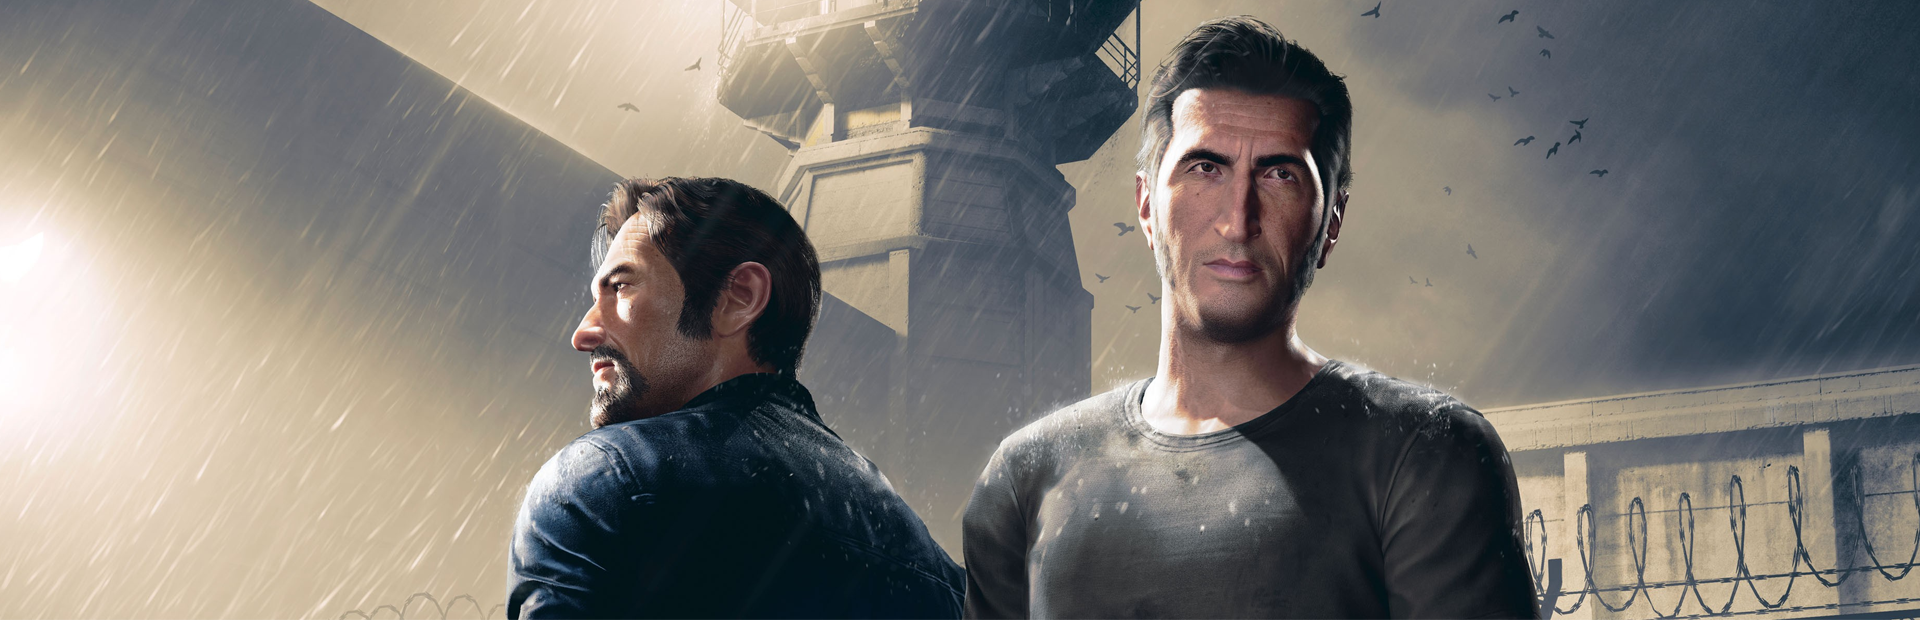 A way out Лео. A way out ps4. A way out персонажи. Away out игра. Say out game